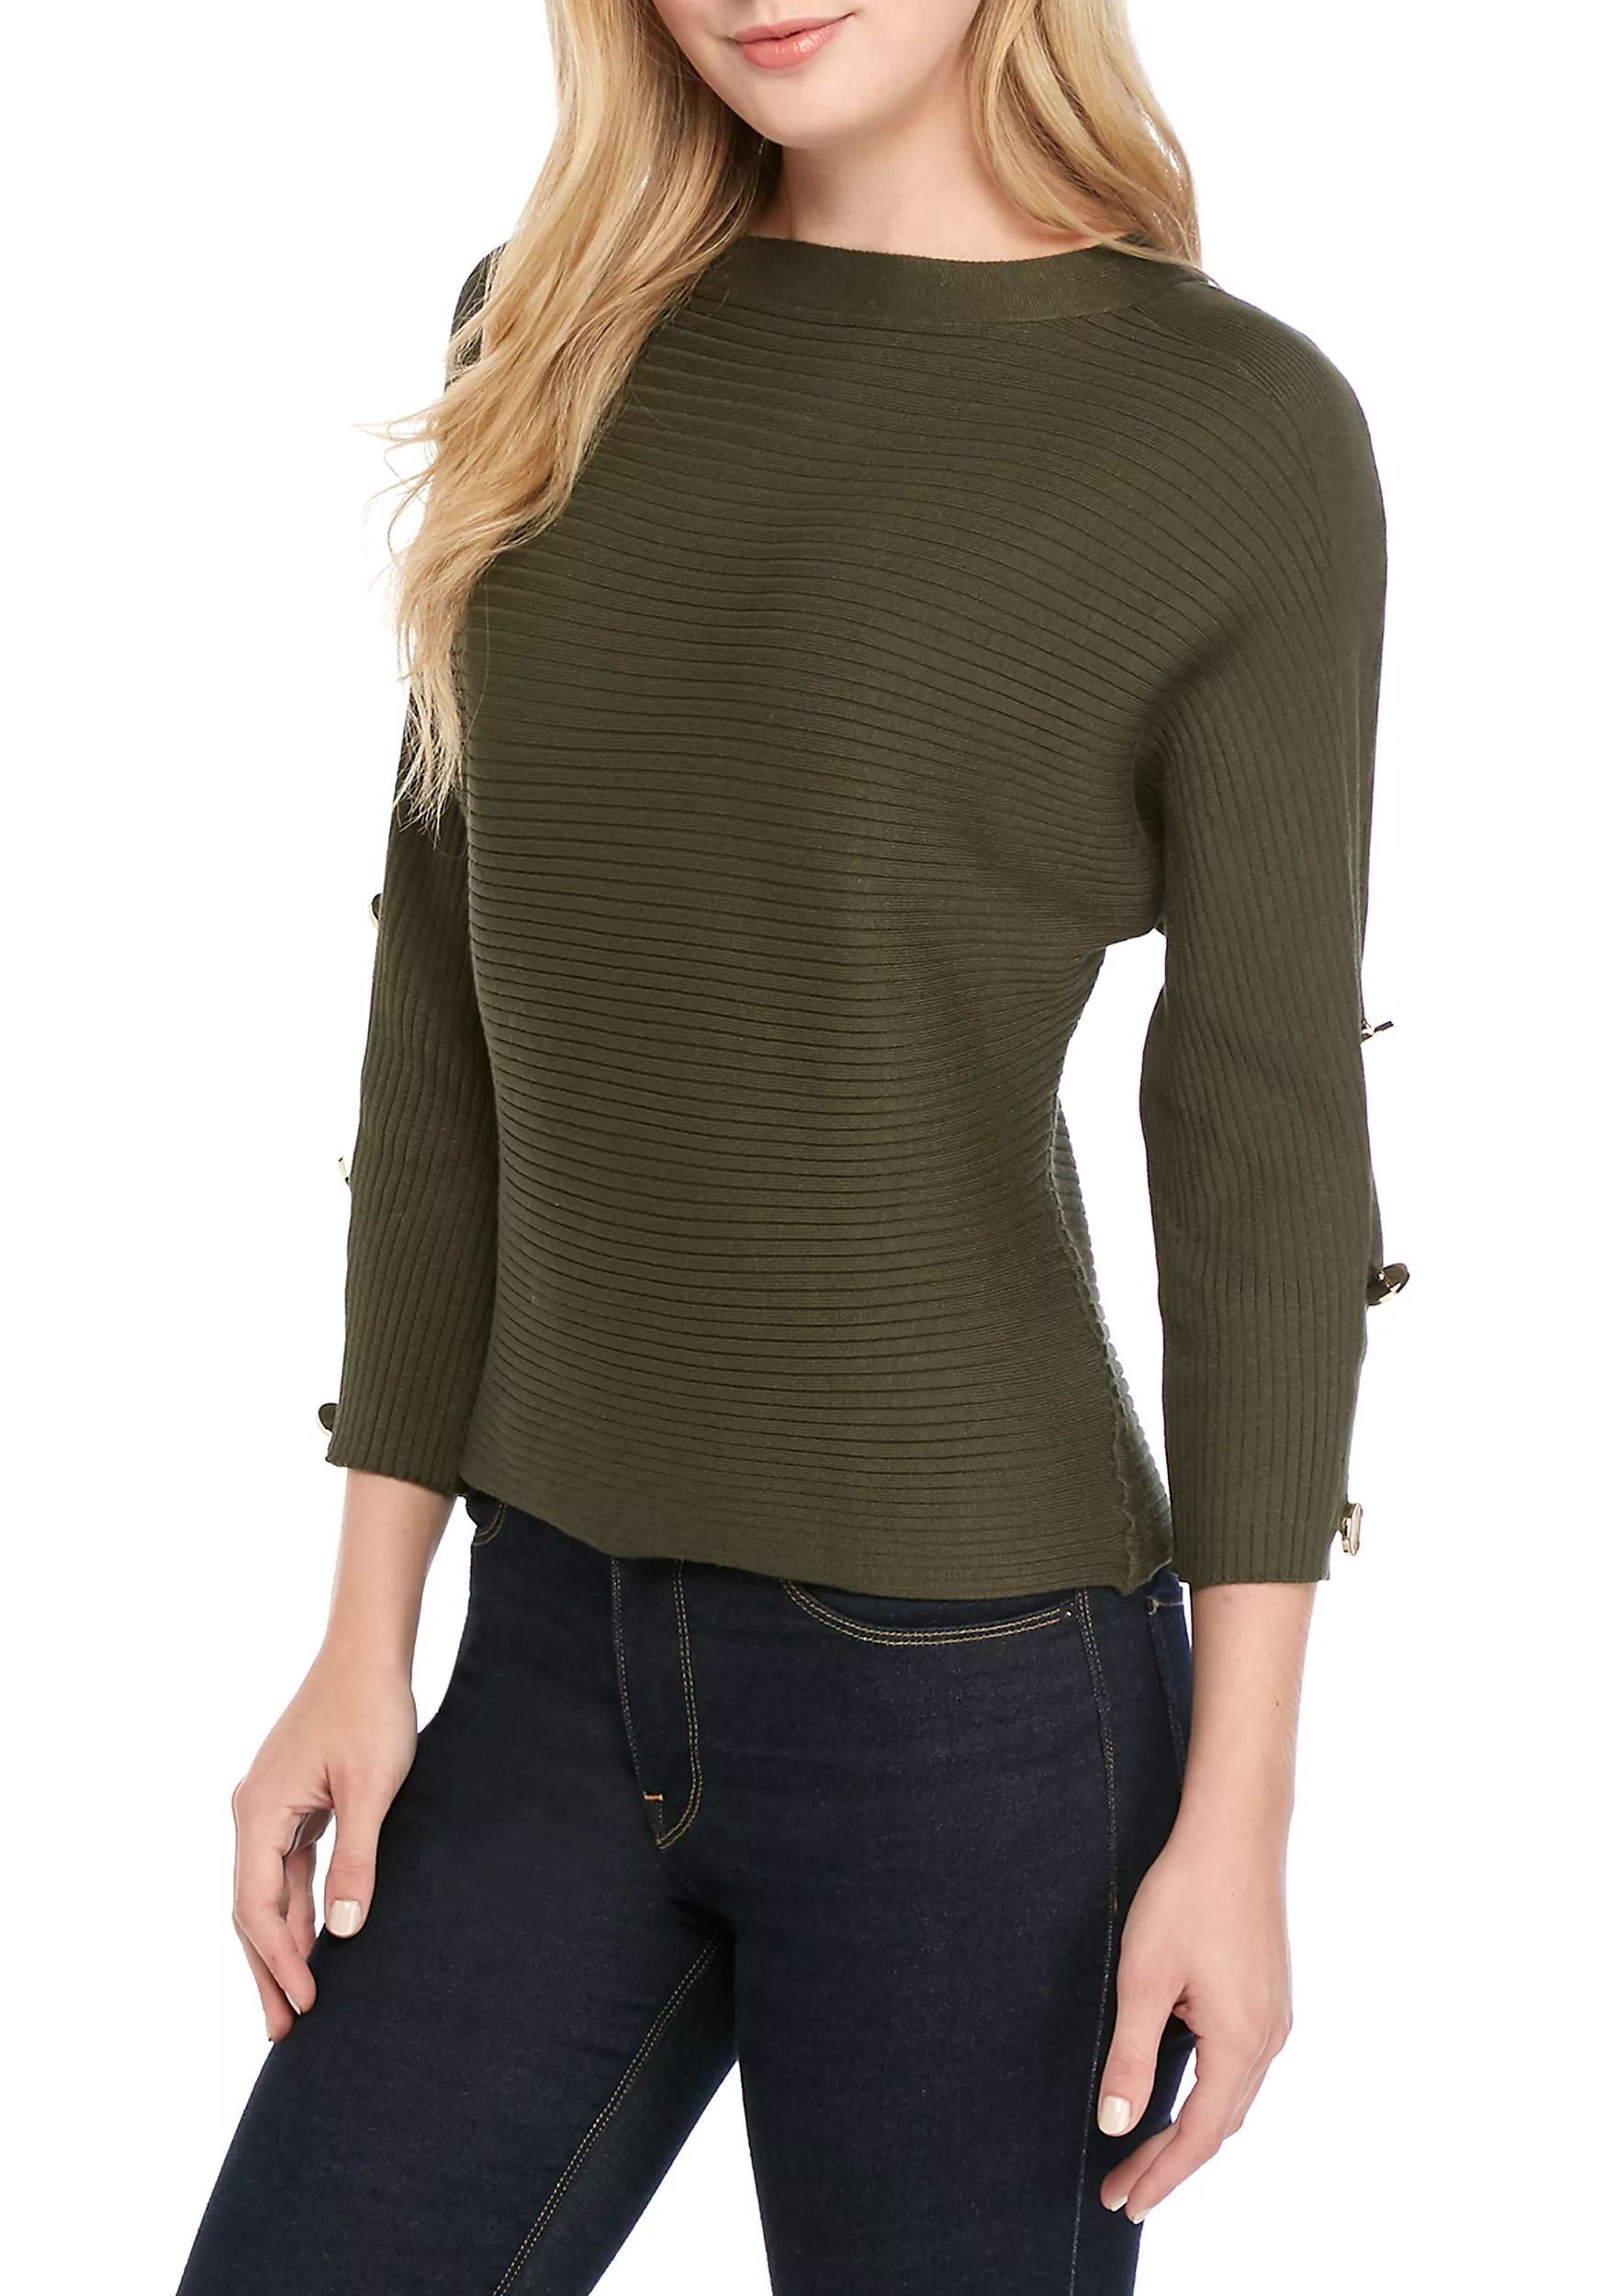 Ottoman Rib Knit Dolman Sleeve Top with Buttons | Belk